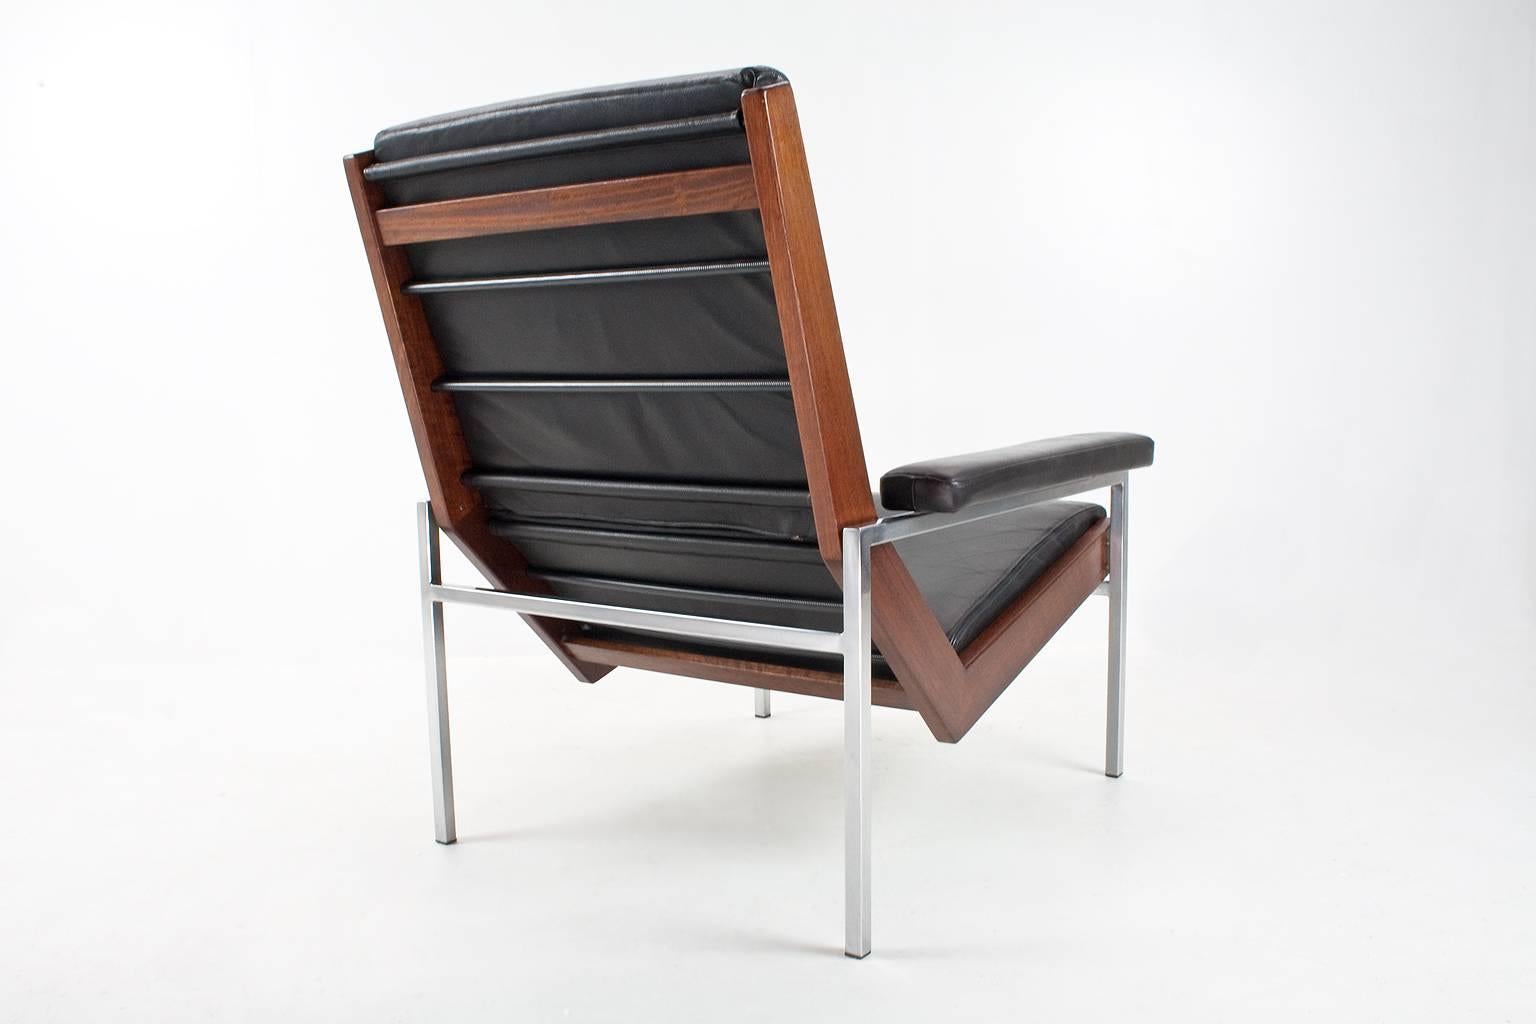 Mid-Century Modern Lounge Chair in Leather by Rob Parry 1960s Dutch Vintage Collectable